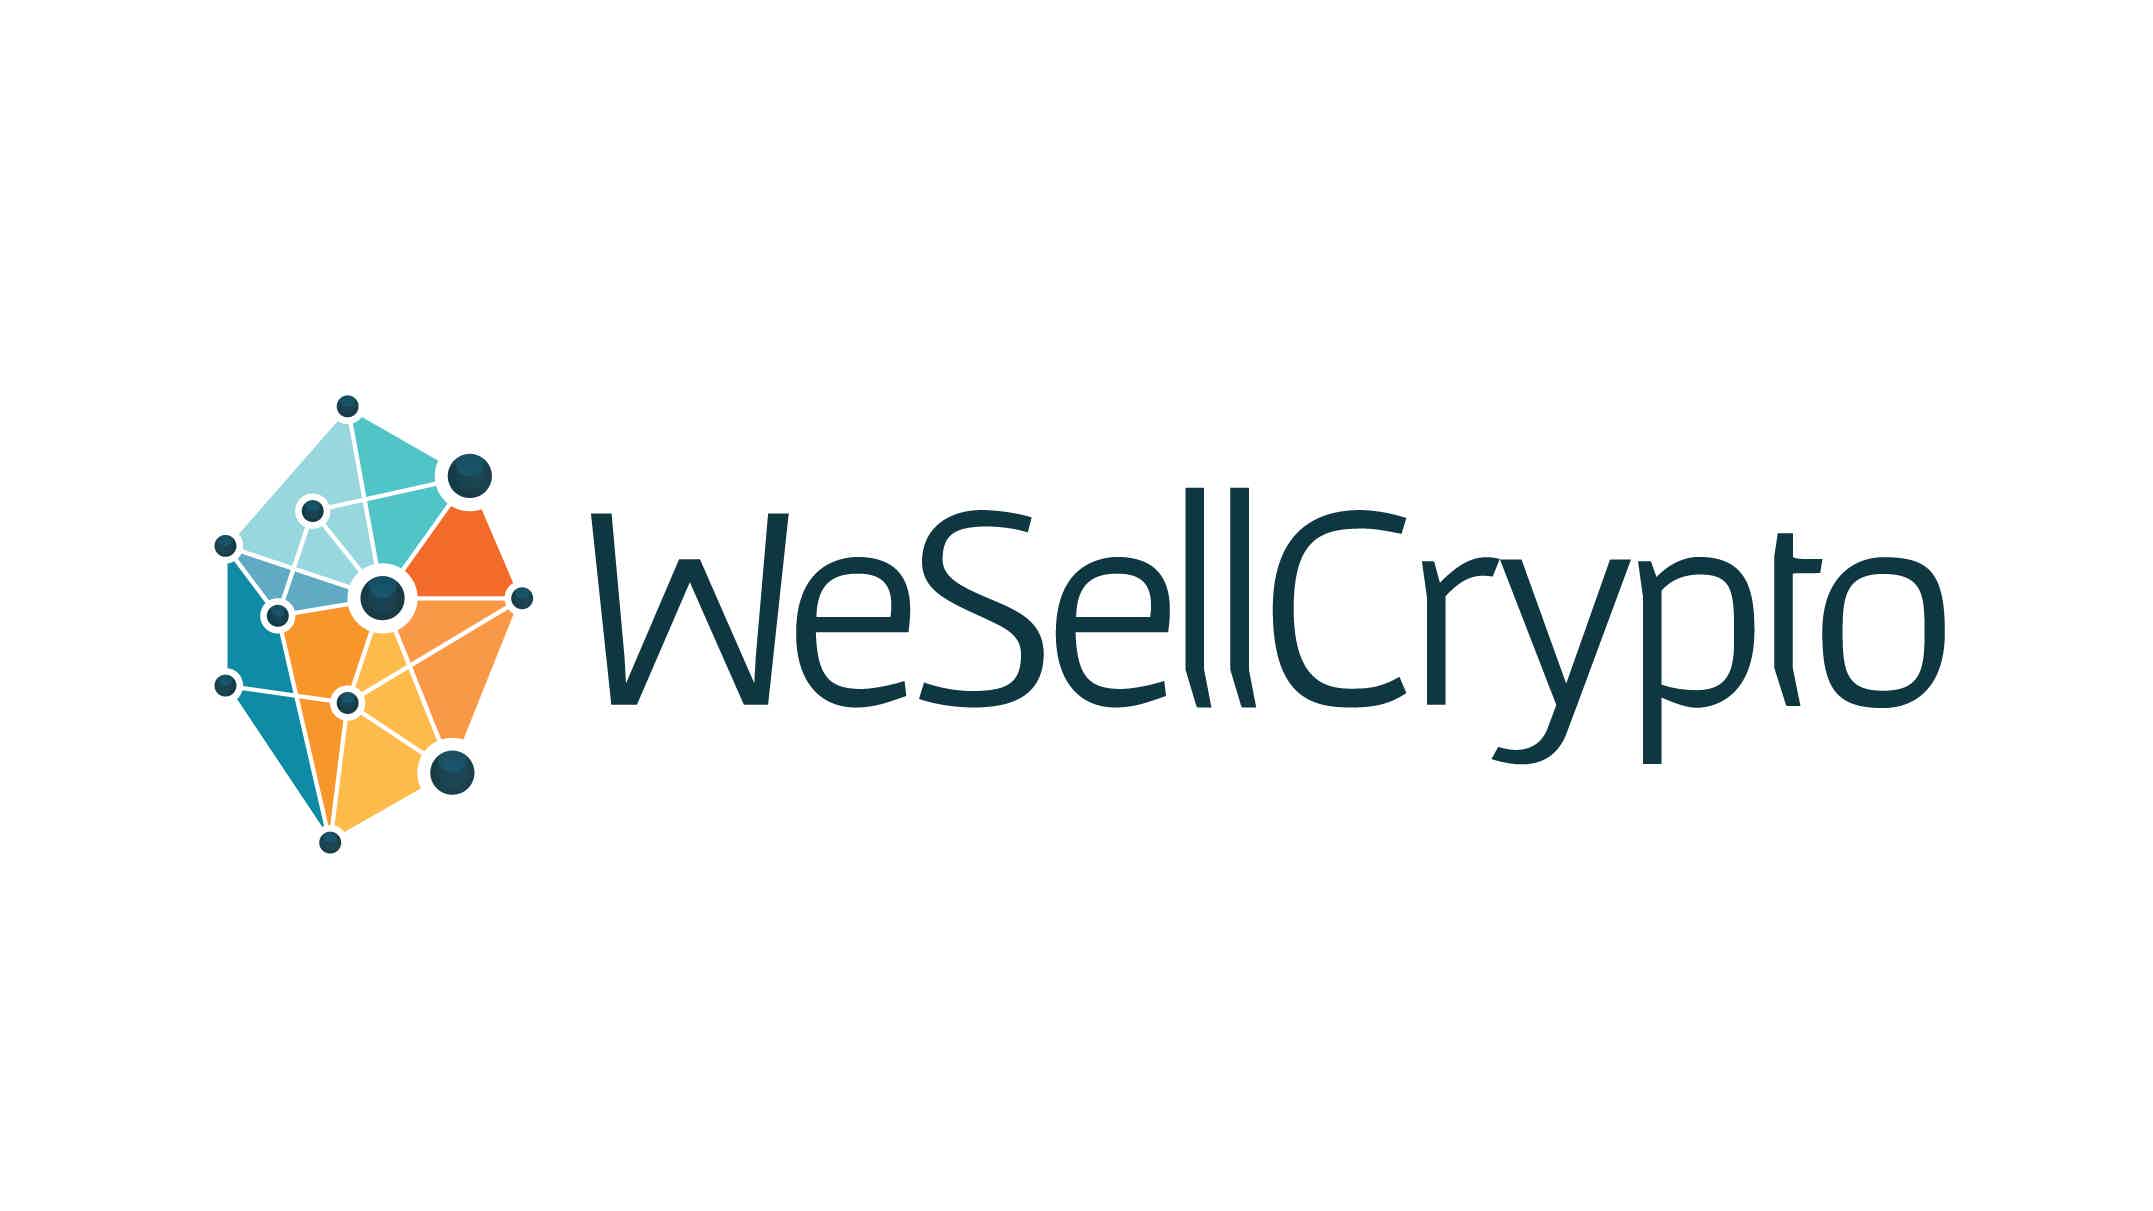 Learn more about its services. Source: Wesellcrypto.